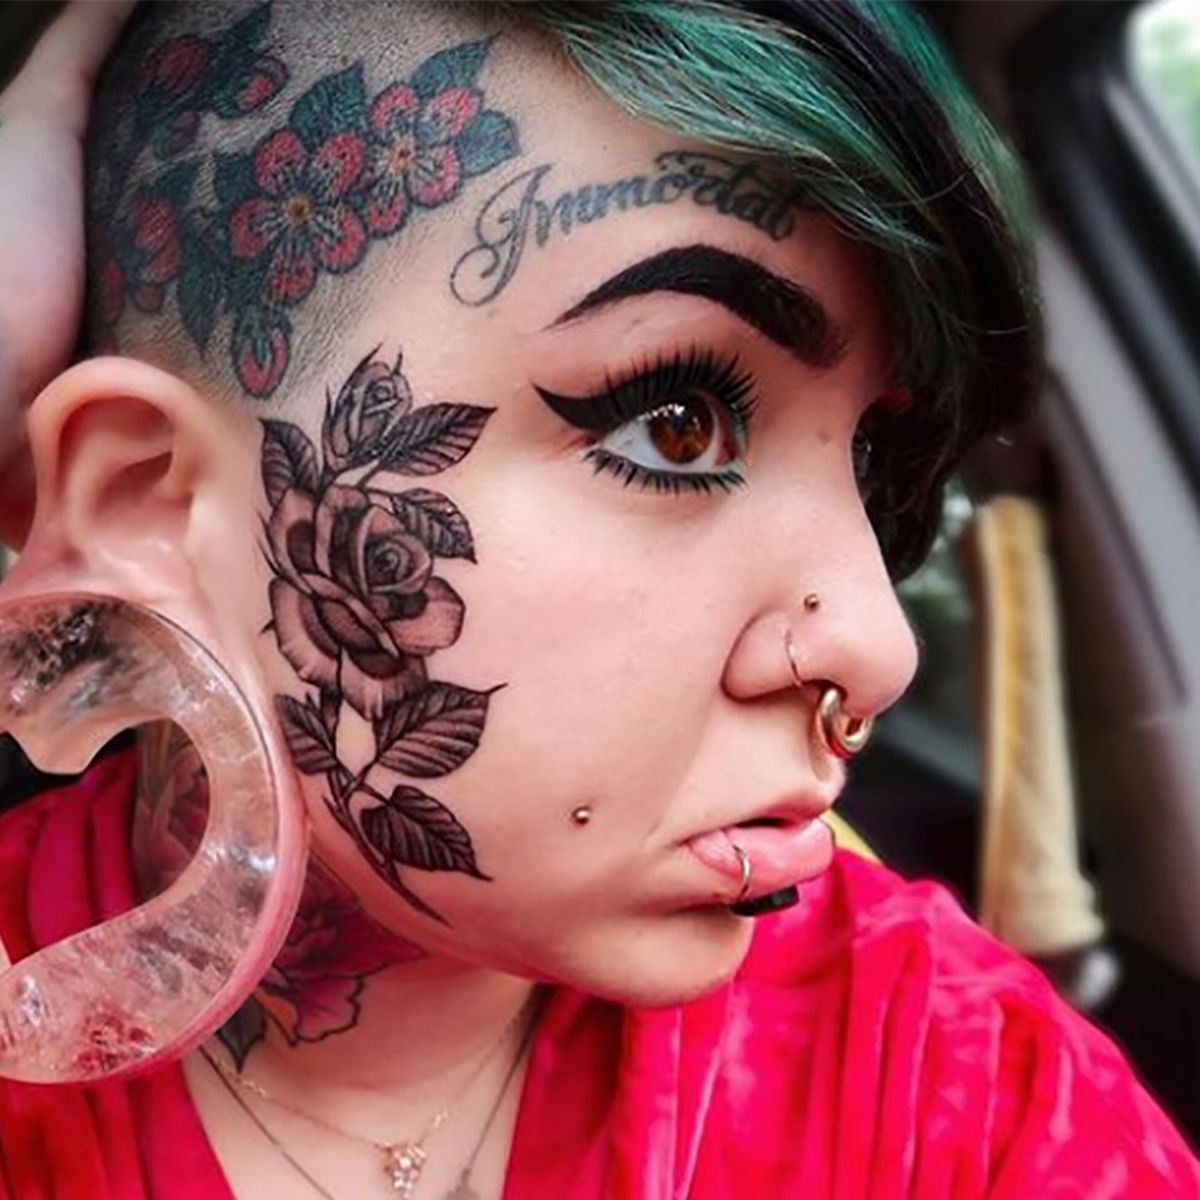 EXCLUSIVE: Woman With World's Biggest Earlobes Says She Spent HOURS ...